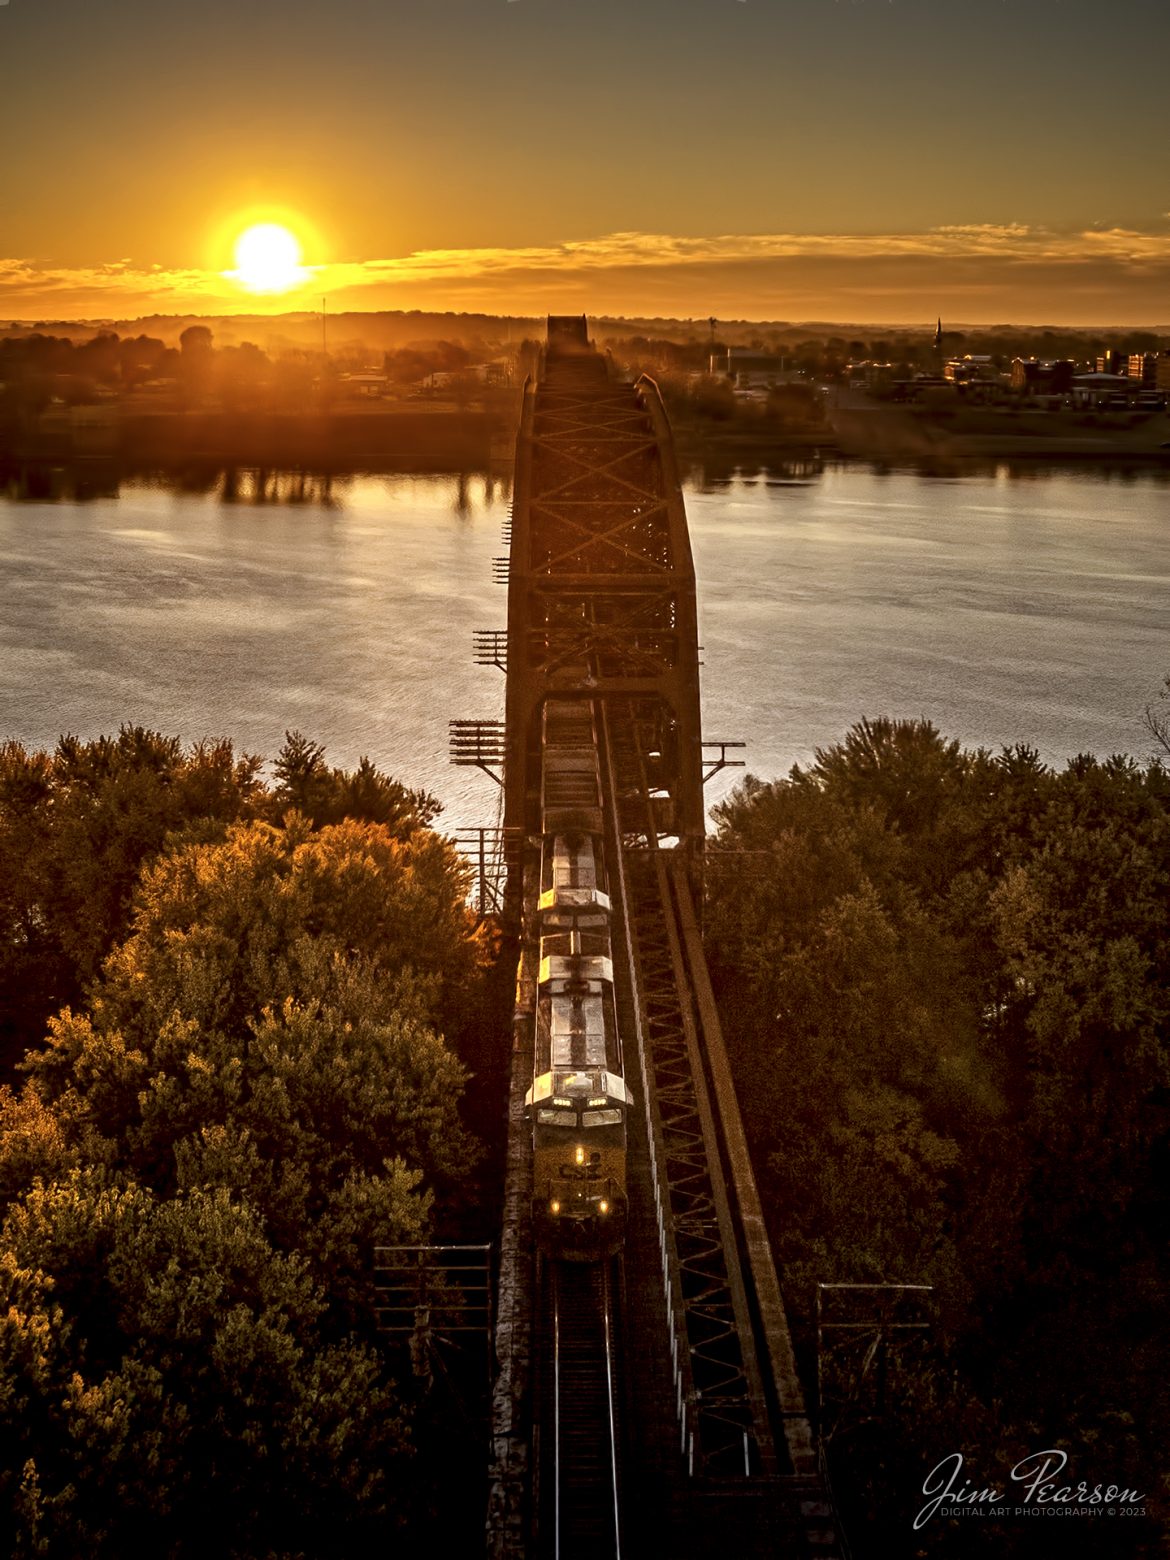 CSXT 845 leads E302 northbound as it exits the bridge over the Ohio River at sunrise, from Henderson, Kentucky, on October 28th, 2022, on the Henderson Subdivision. This train runs between Stilesboro, GA (Plant Bowen) and Sugar Camp Mine on the Evansville Western Railway.

Tech Info: DJI Mavic Air 2S Drone, RAW, 22mm, f/2.8, 1/2000, ISO 100 -1.7stops.

#trainphotography #railroadphotography #trains #railways #dronephotography #trainphotographer #railroadphotographer #jimpearsonphotography